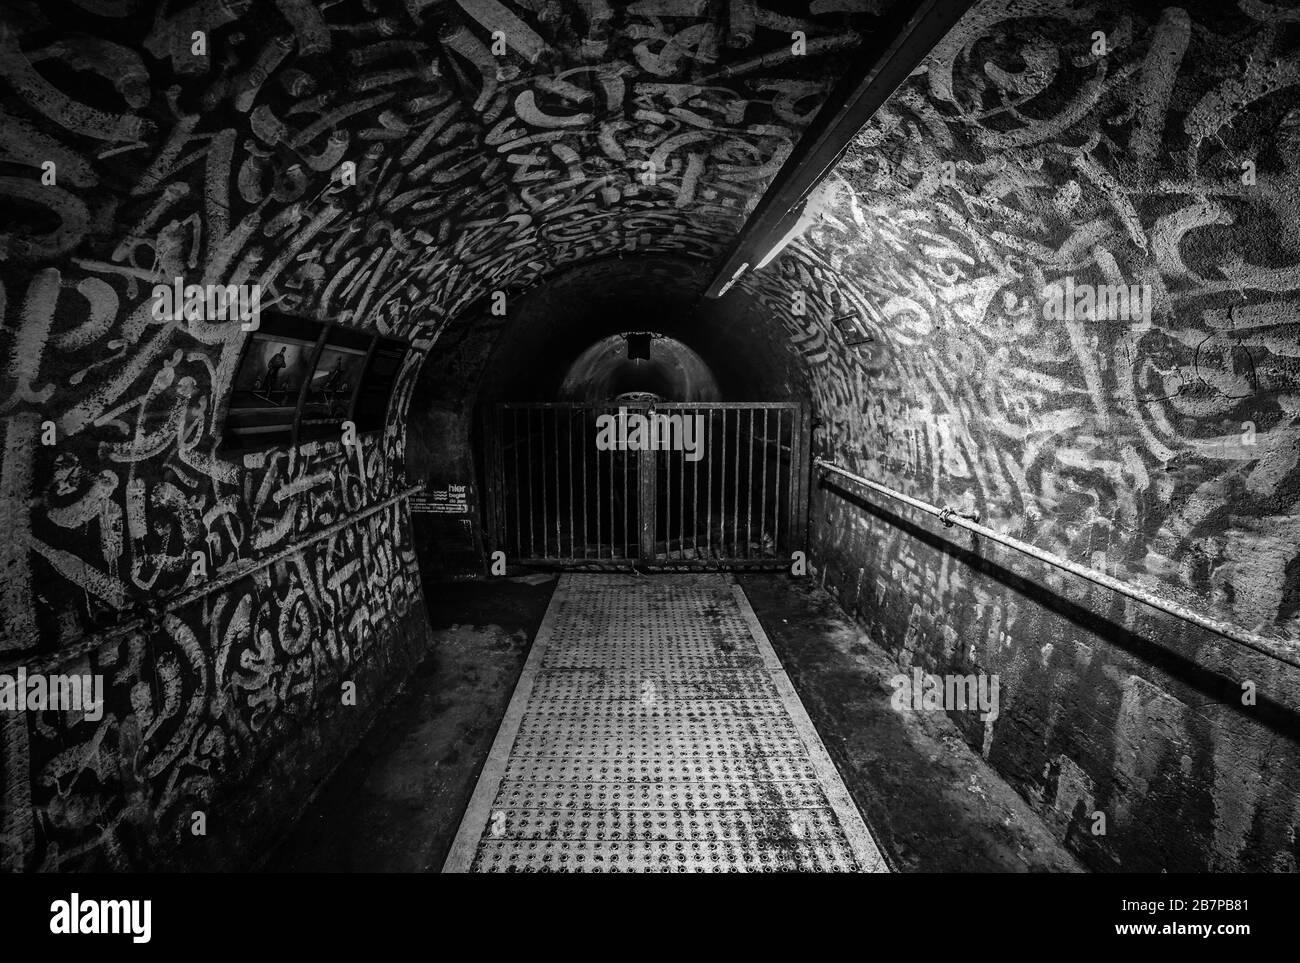 Anderlecht, Brussels / Belgium - 07 16 2019: Man walking in the industrial interiors of the sewer museum main tunnel of the Chaussée de Mons Stock Photo